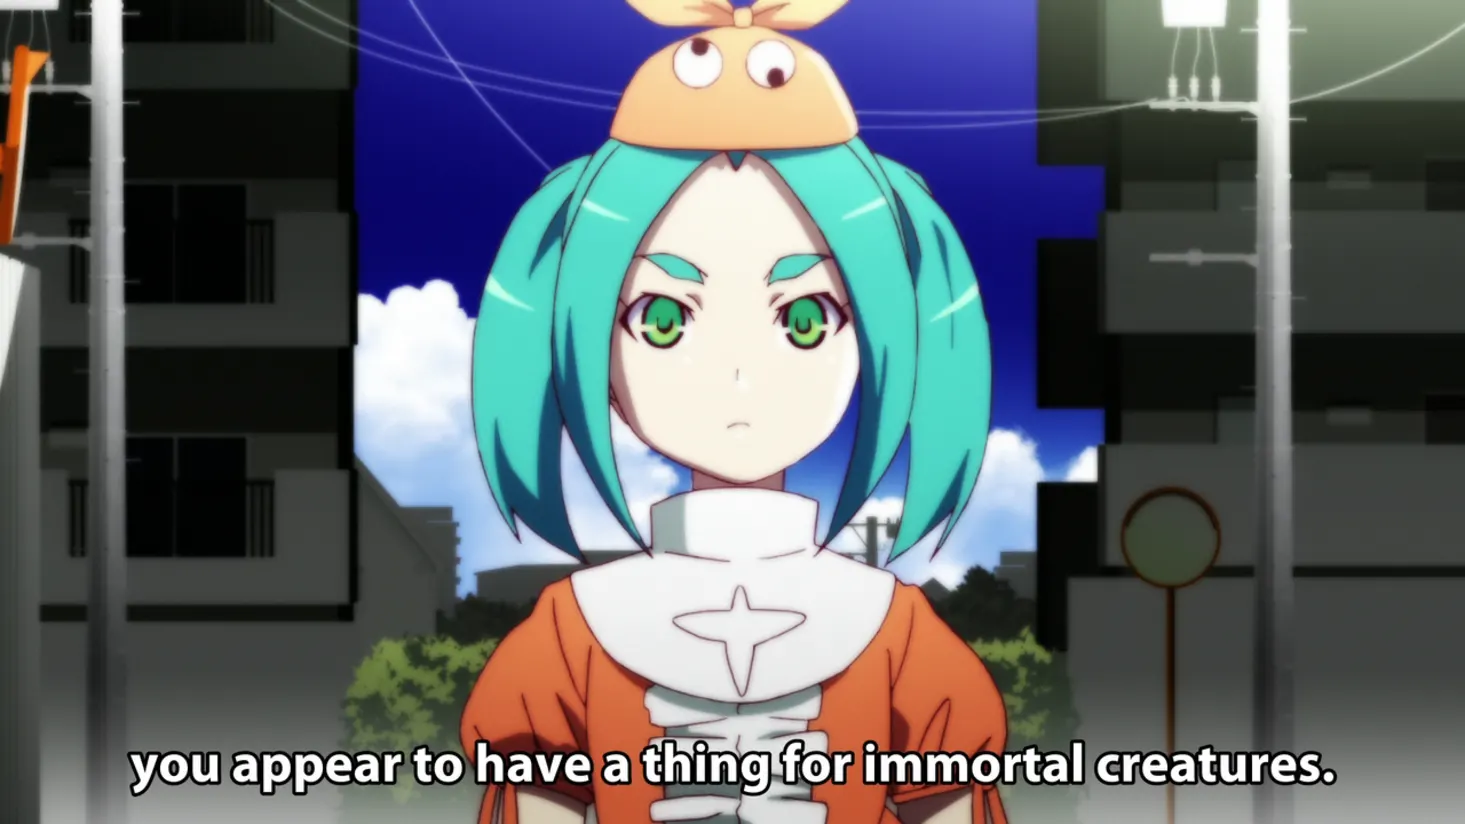 Yotsugi Ononoki has such a cool character design. I don’t know what that thing on her head is meant to be, but it is cute and quirky. I hope she doesn’t end up naked in the next series.